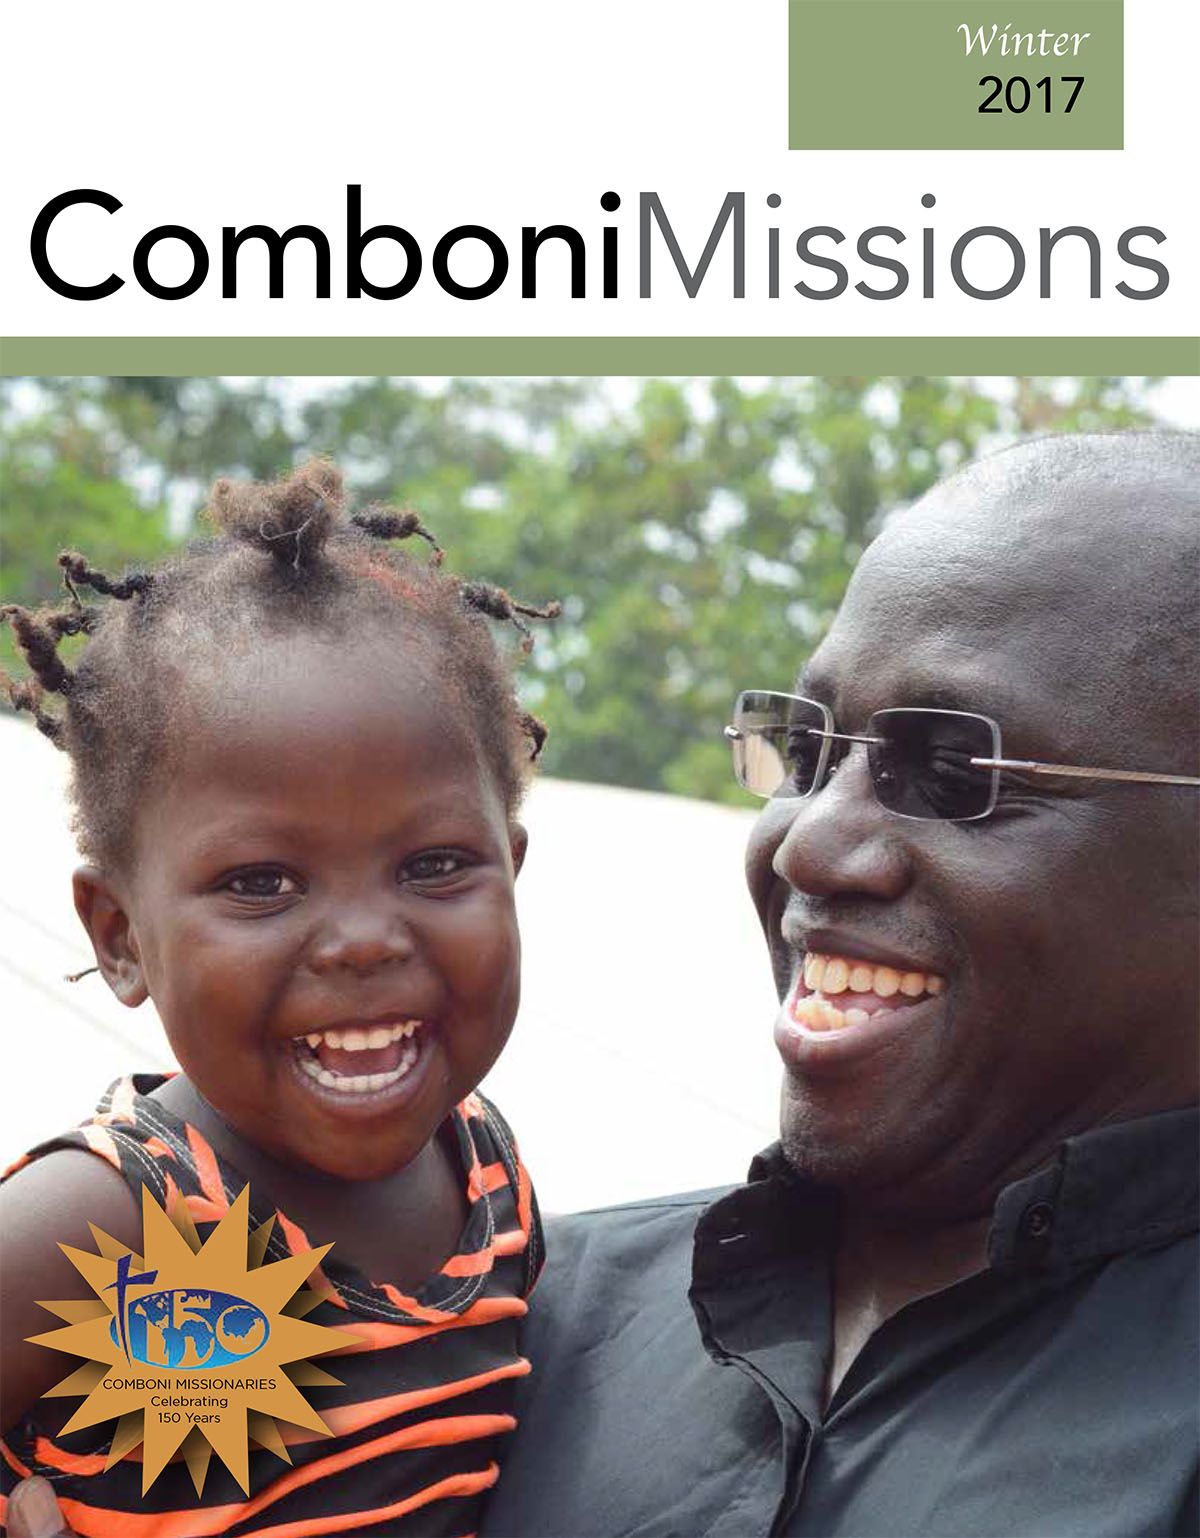 Magazine of the Year – Comboni Missions Brings Home Awards